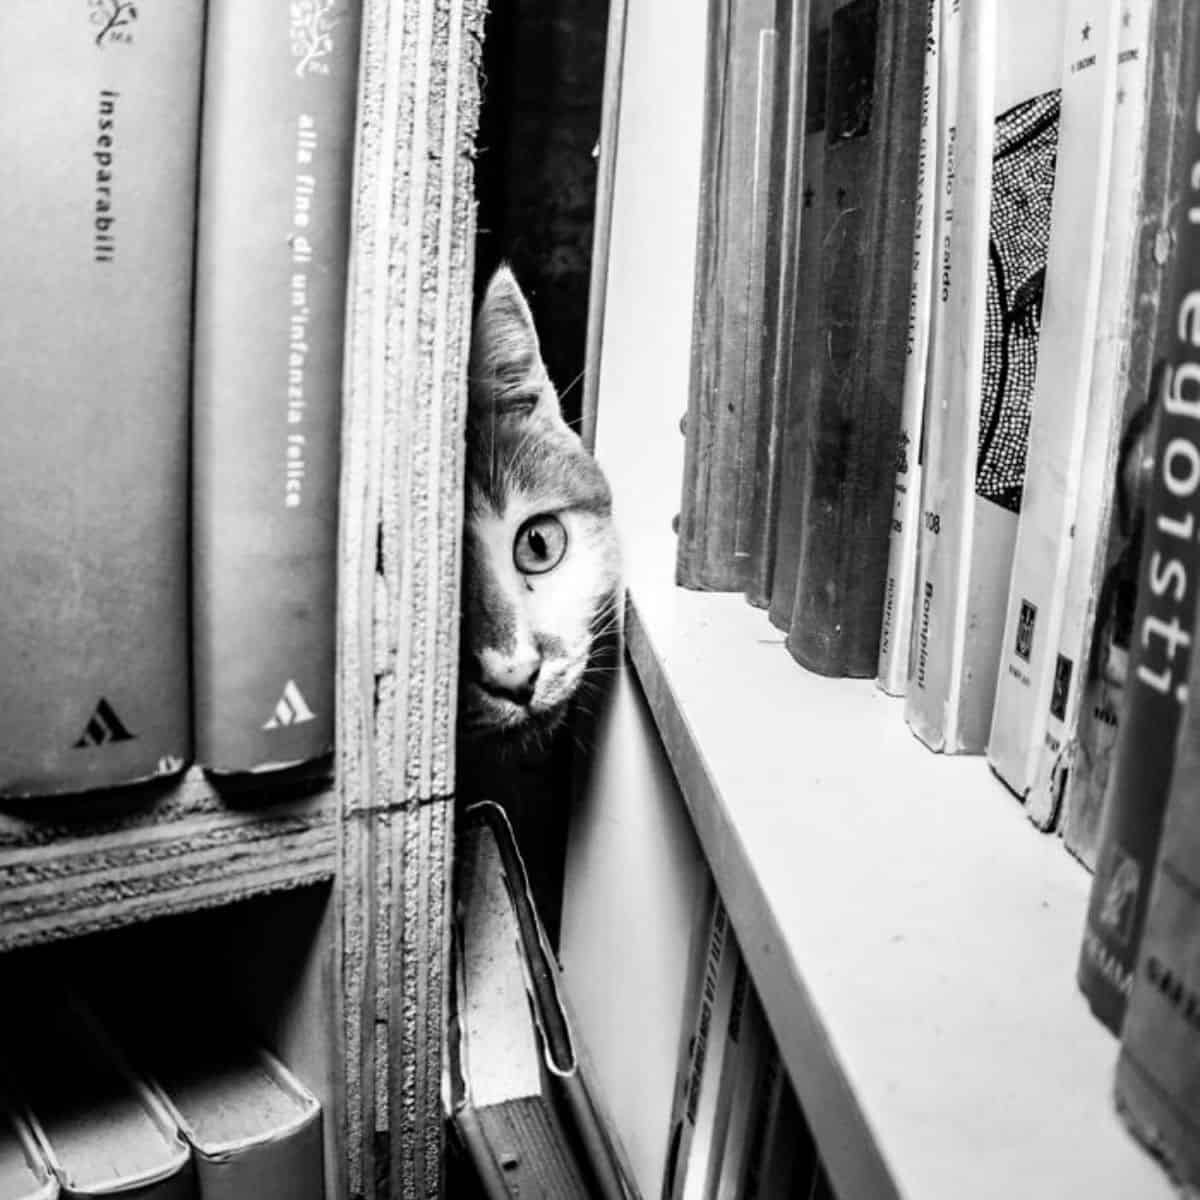 the cat hides behind the books